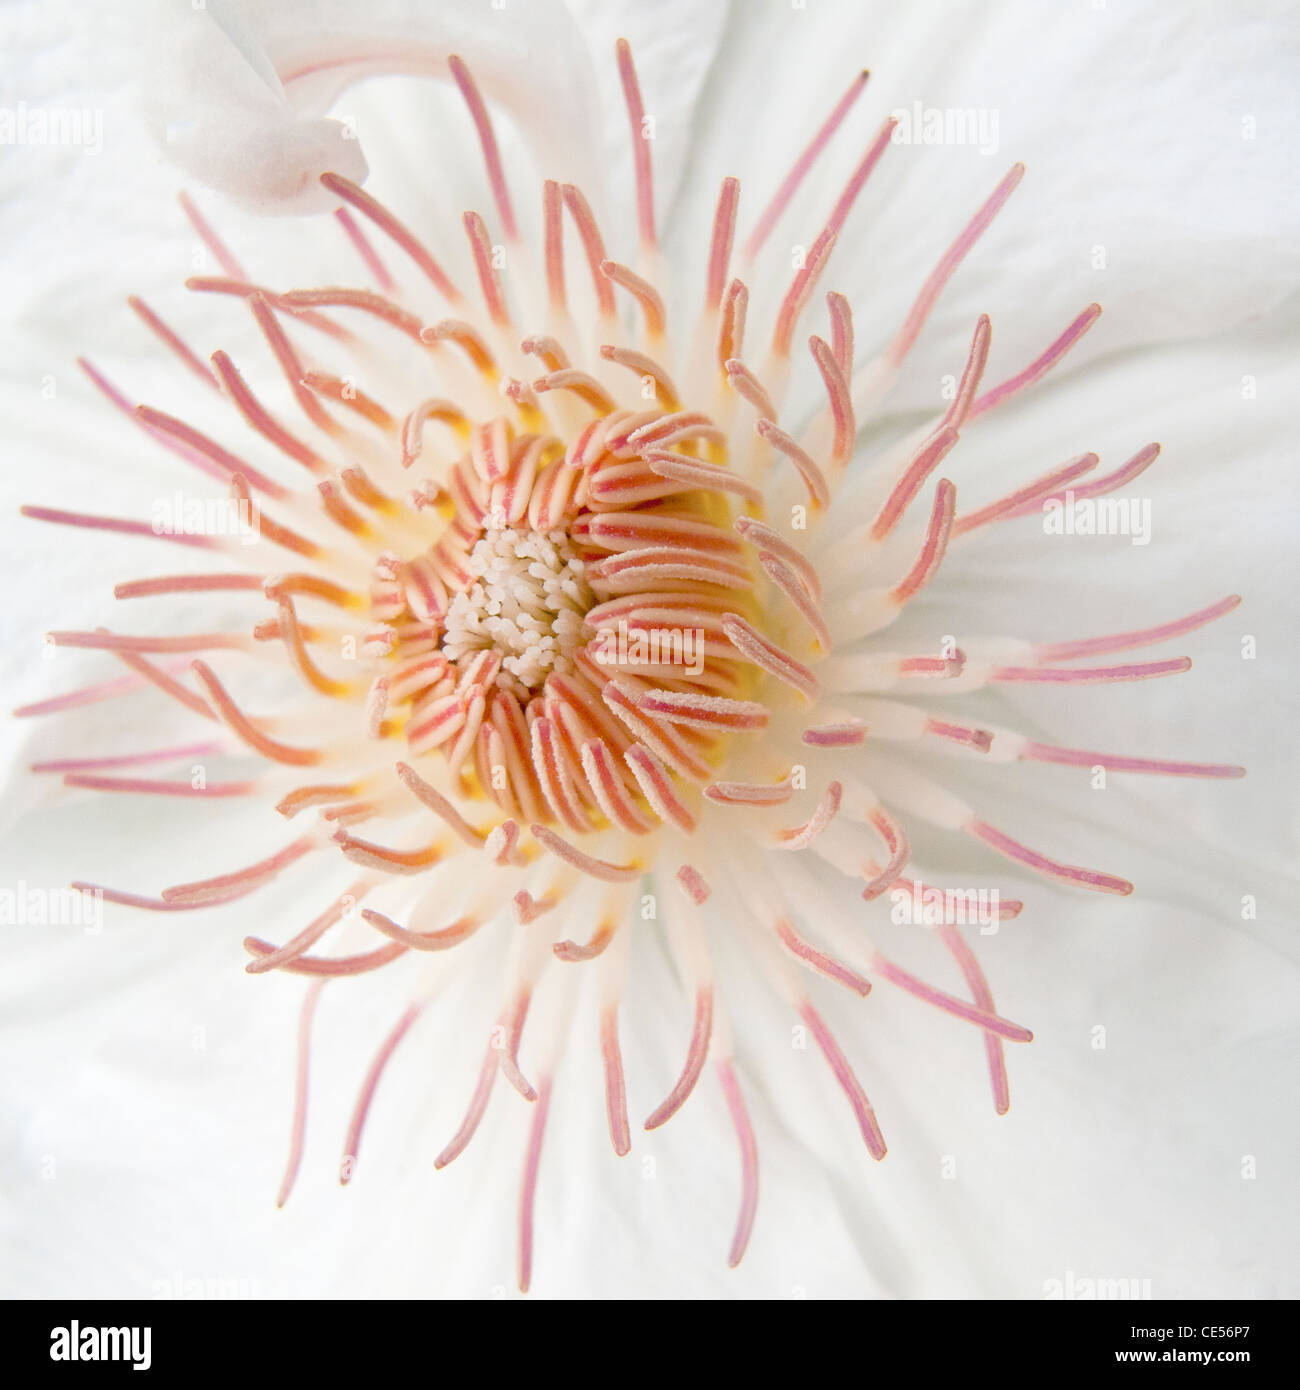 Exquisite beauty of an open white Clematis flower, showing beautiful, delicate pastel shades of the stamens. Stock Photo